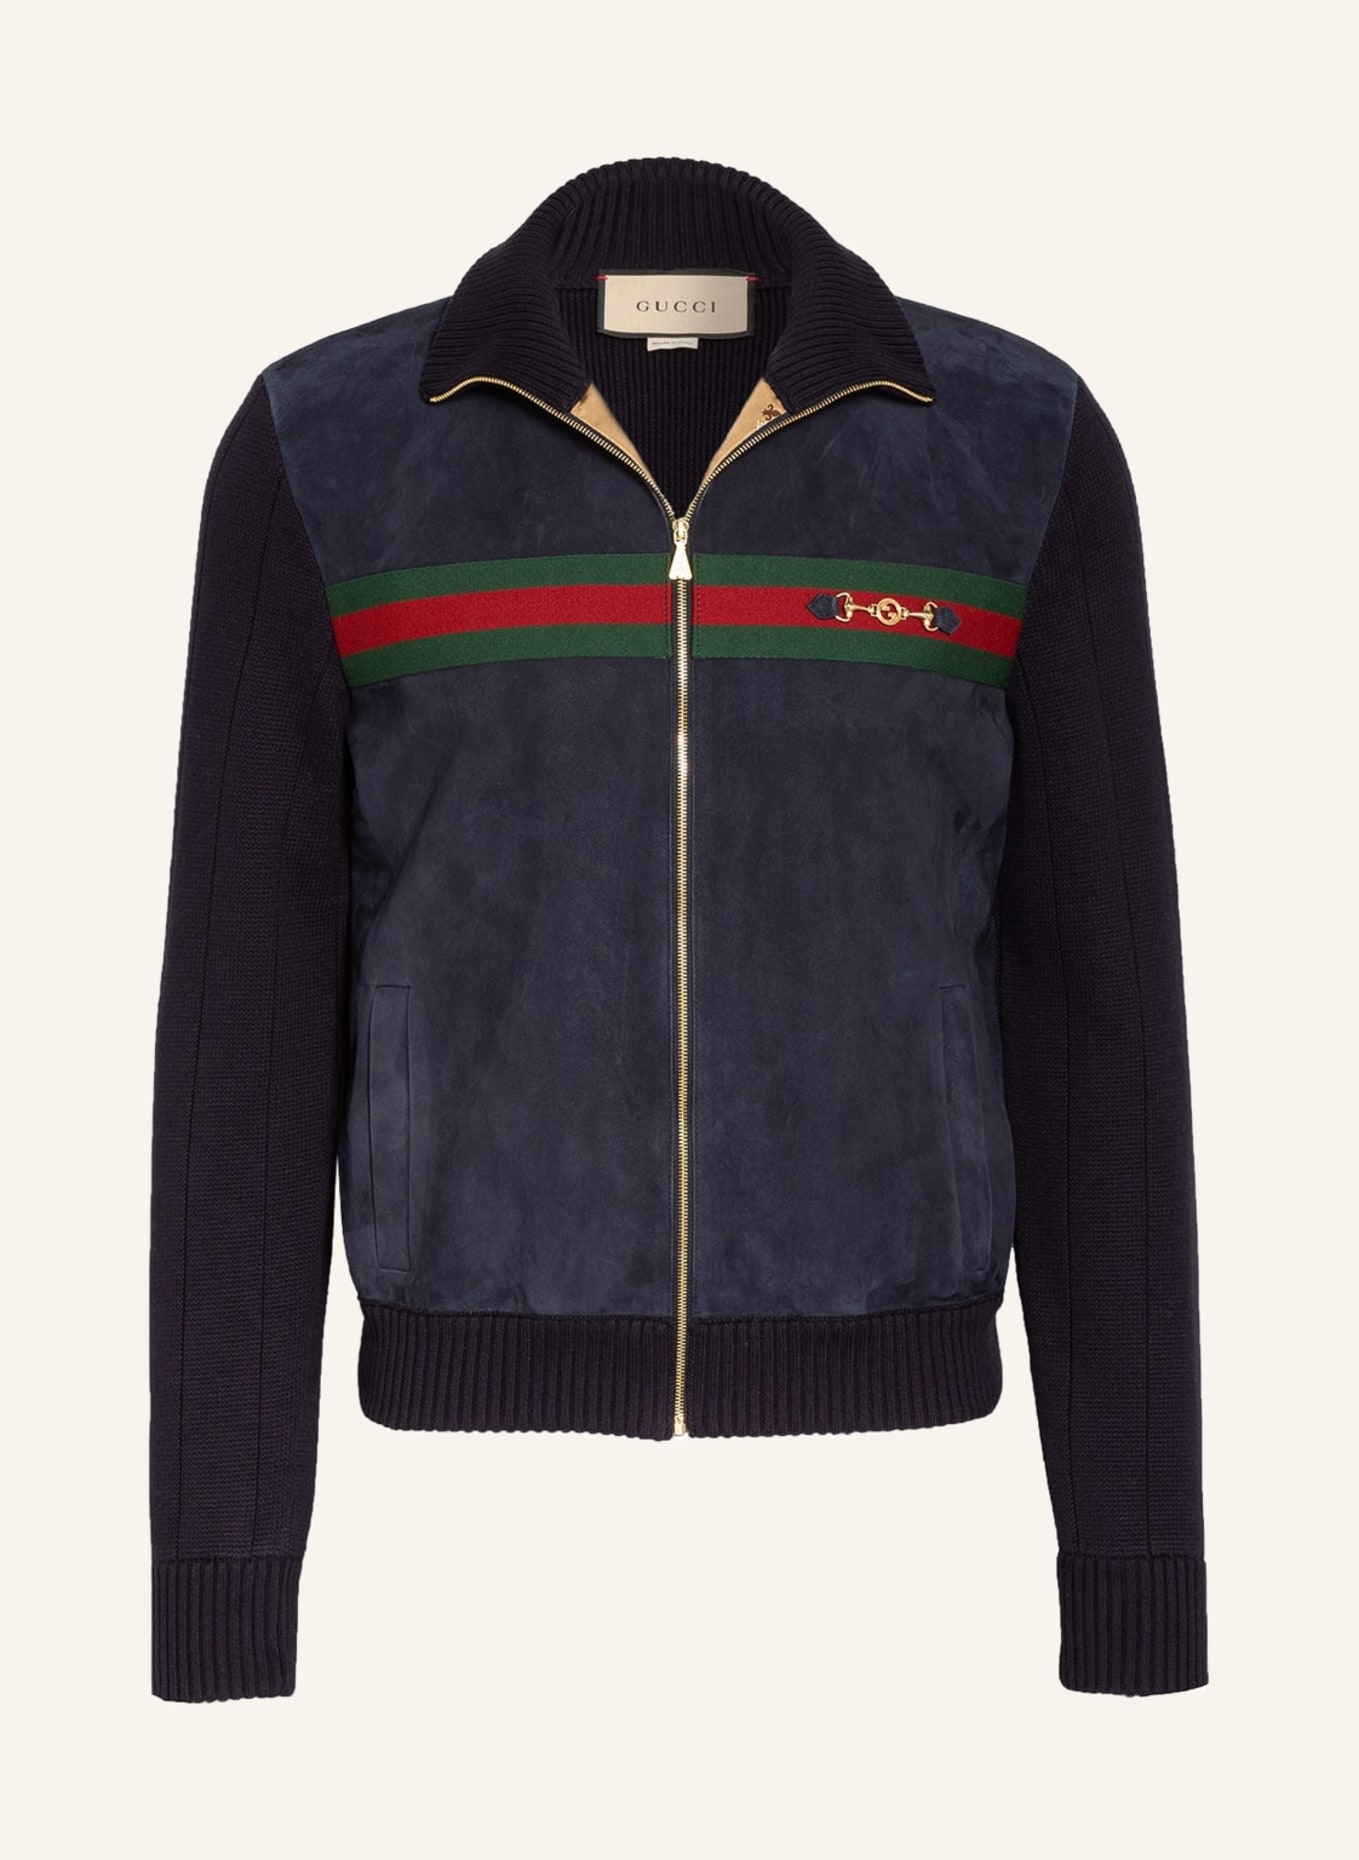 GUCCI Bomber in mixed materials blue/ red/ dark